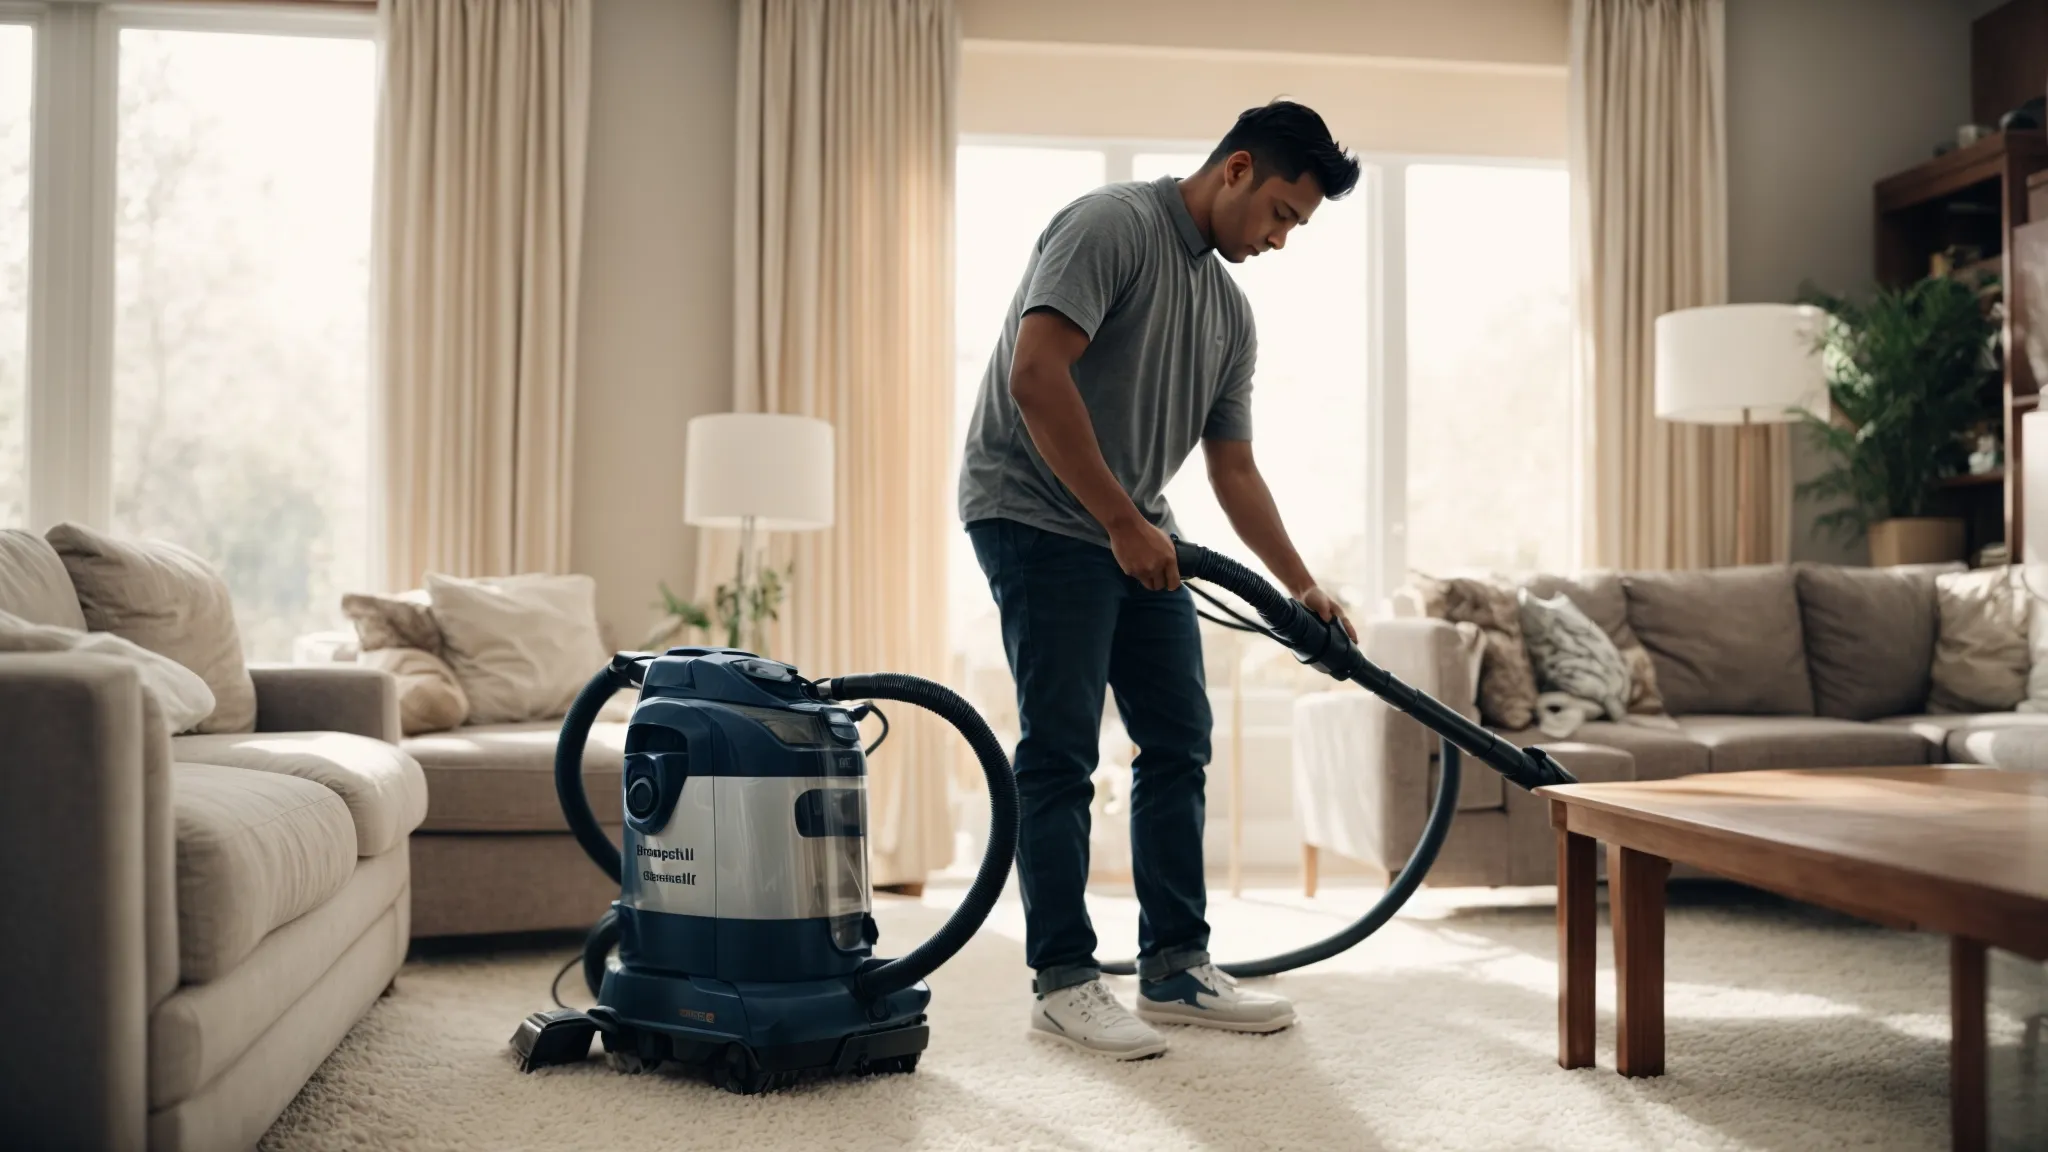 a person cleaning a carpet with a professional steam cleaner in a well-lit living room.